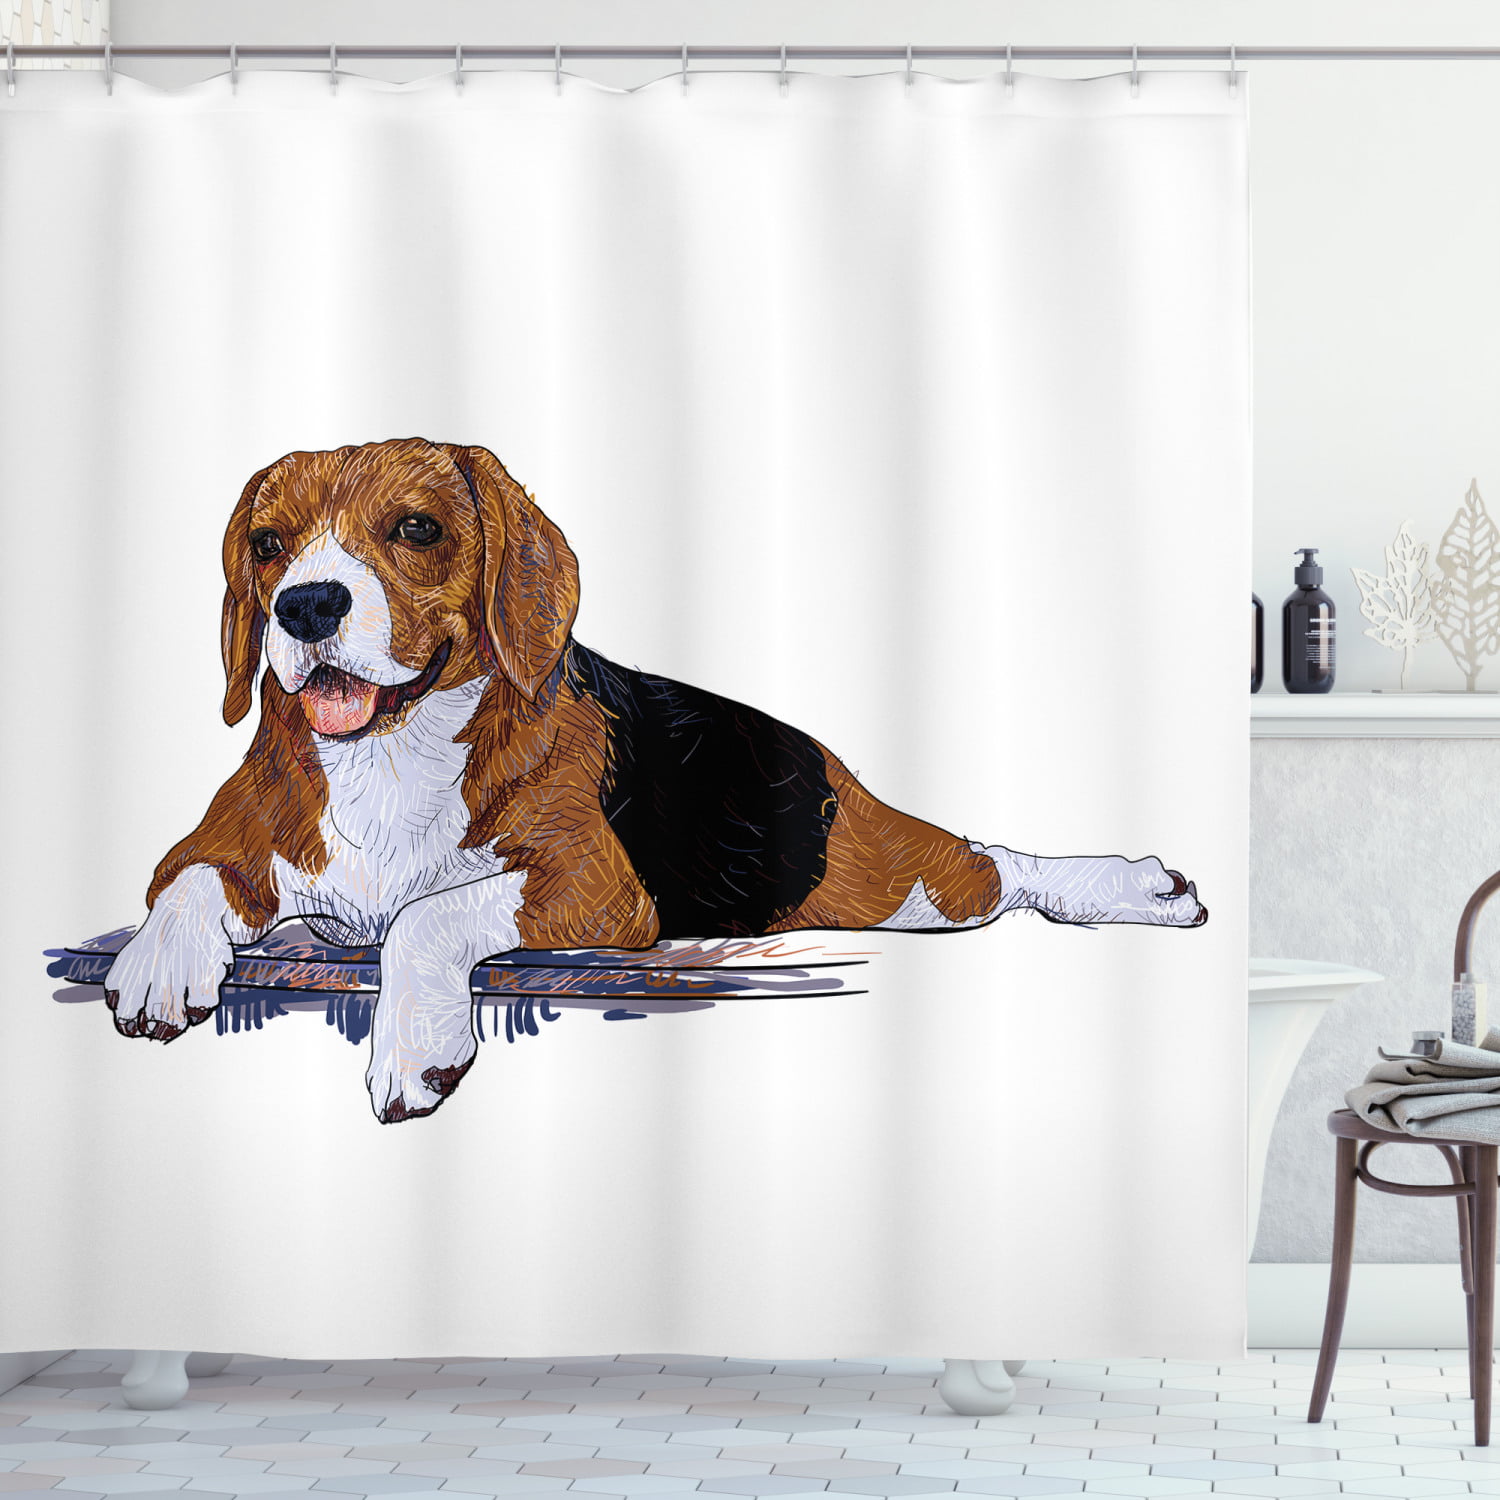 Dog Two Beagles Love Each Other Bathroom Shower Curtain Set Fabric 12 Hook 71"